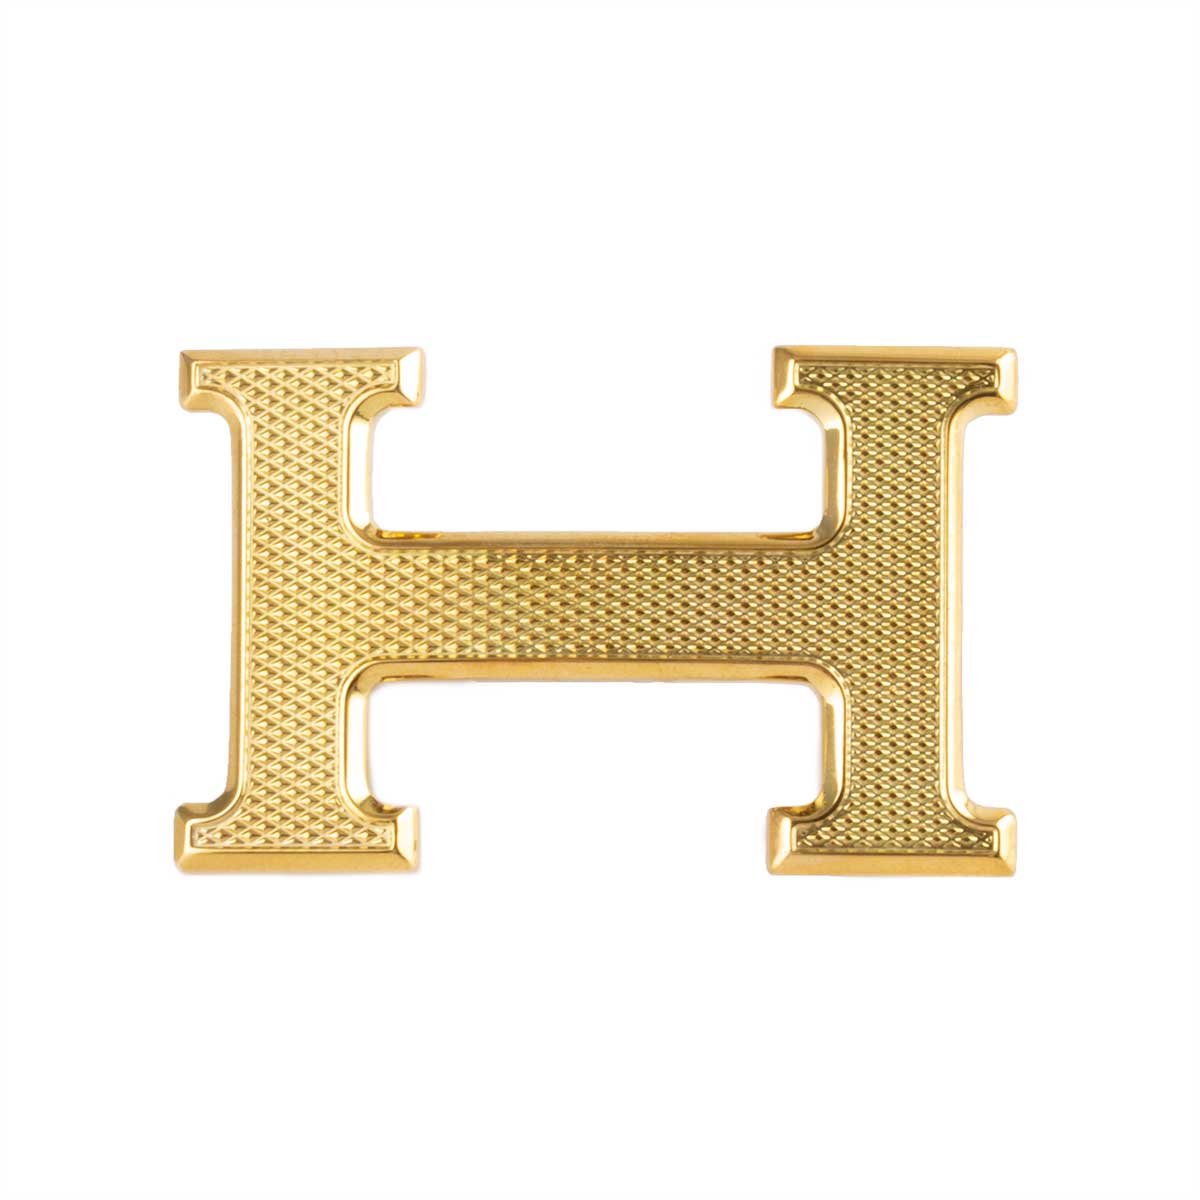 Classic leather belt with hatched effect golden H buckle